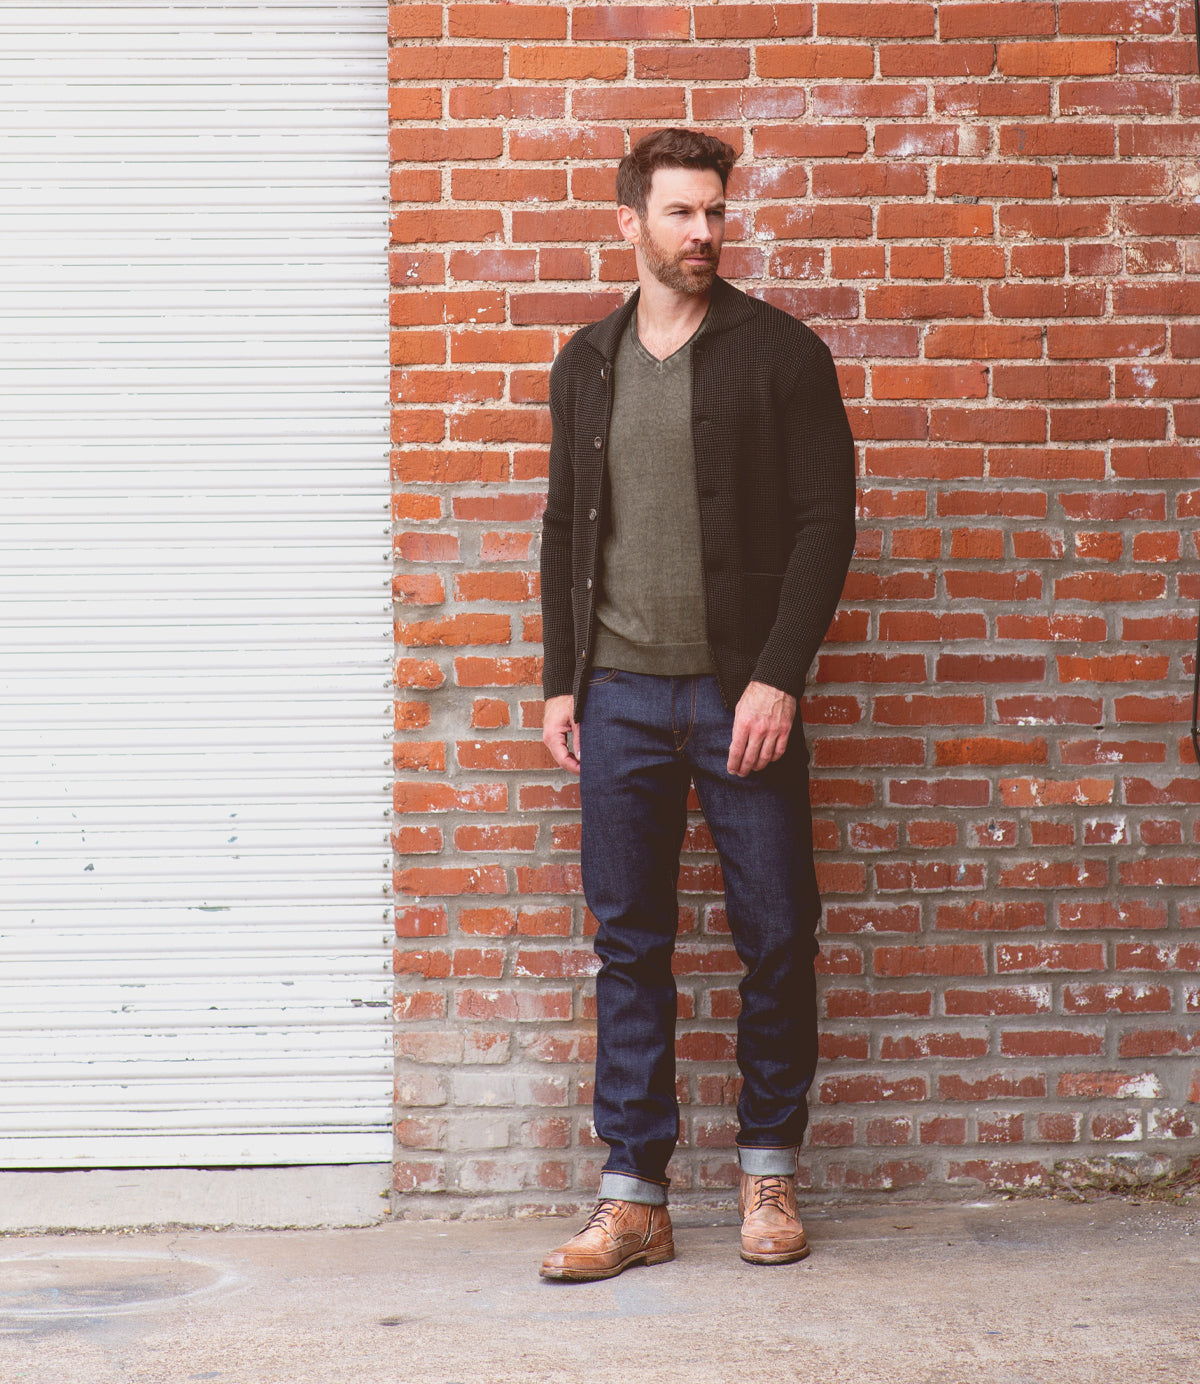 A man standing against a brick wall, wearing a dark cardigan, green shirt, blue jeans, and brown leather Bed Stu lace-up ankle boots.